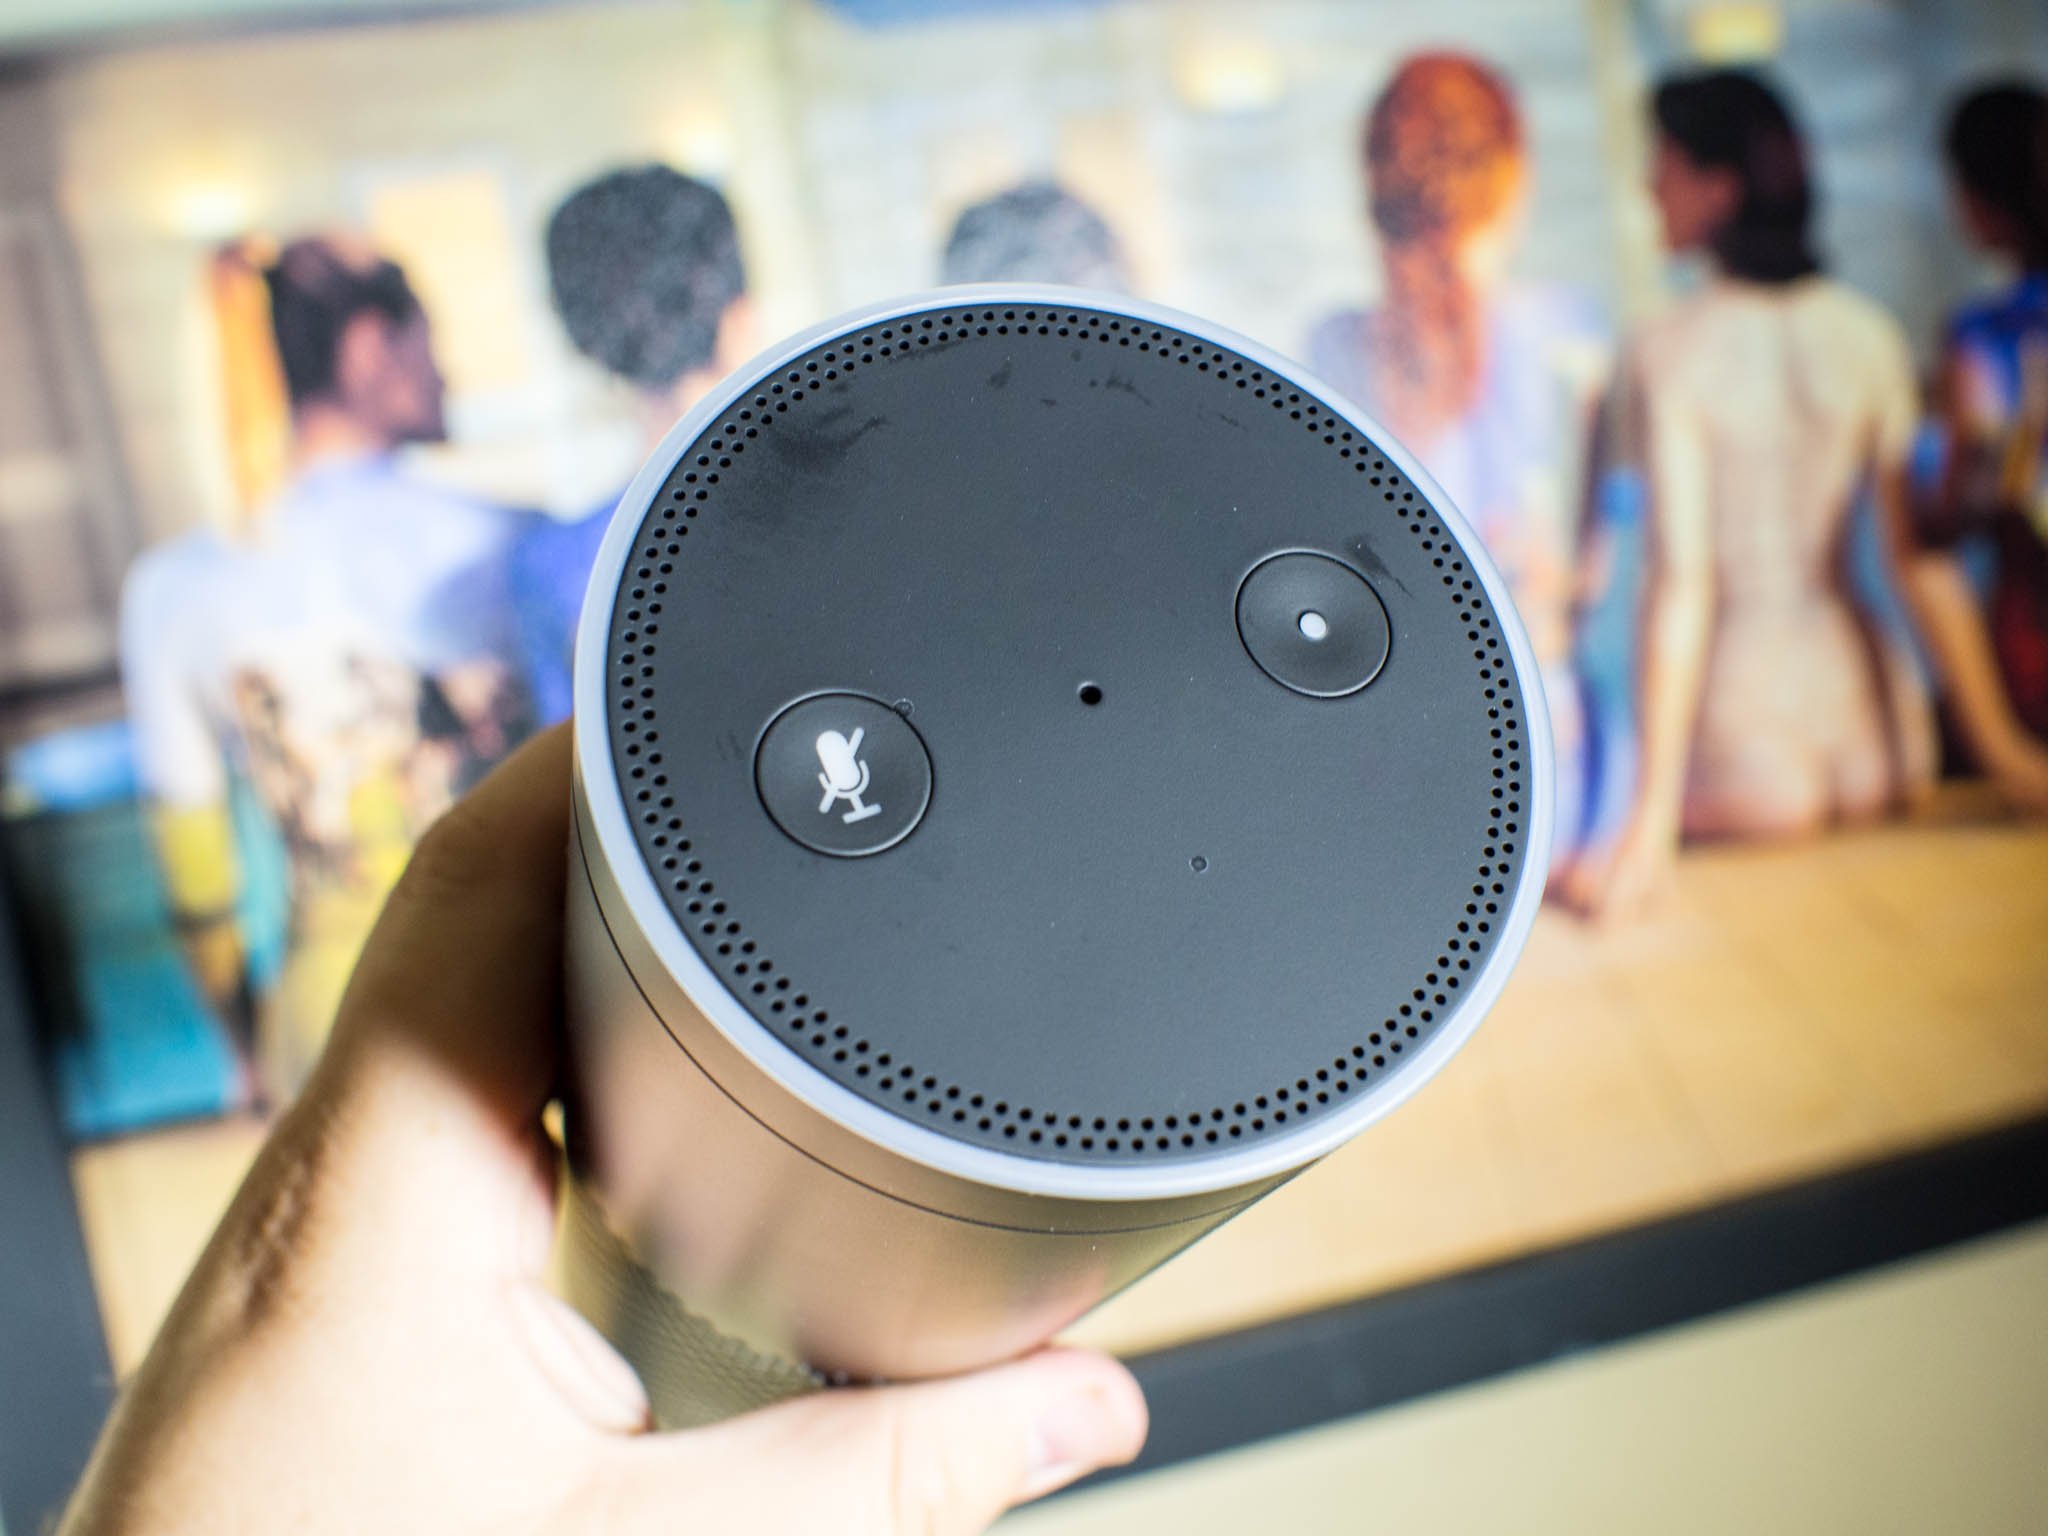 Amazon Echo adds more sources for news briefings